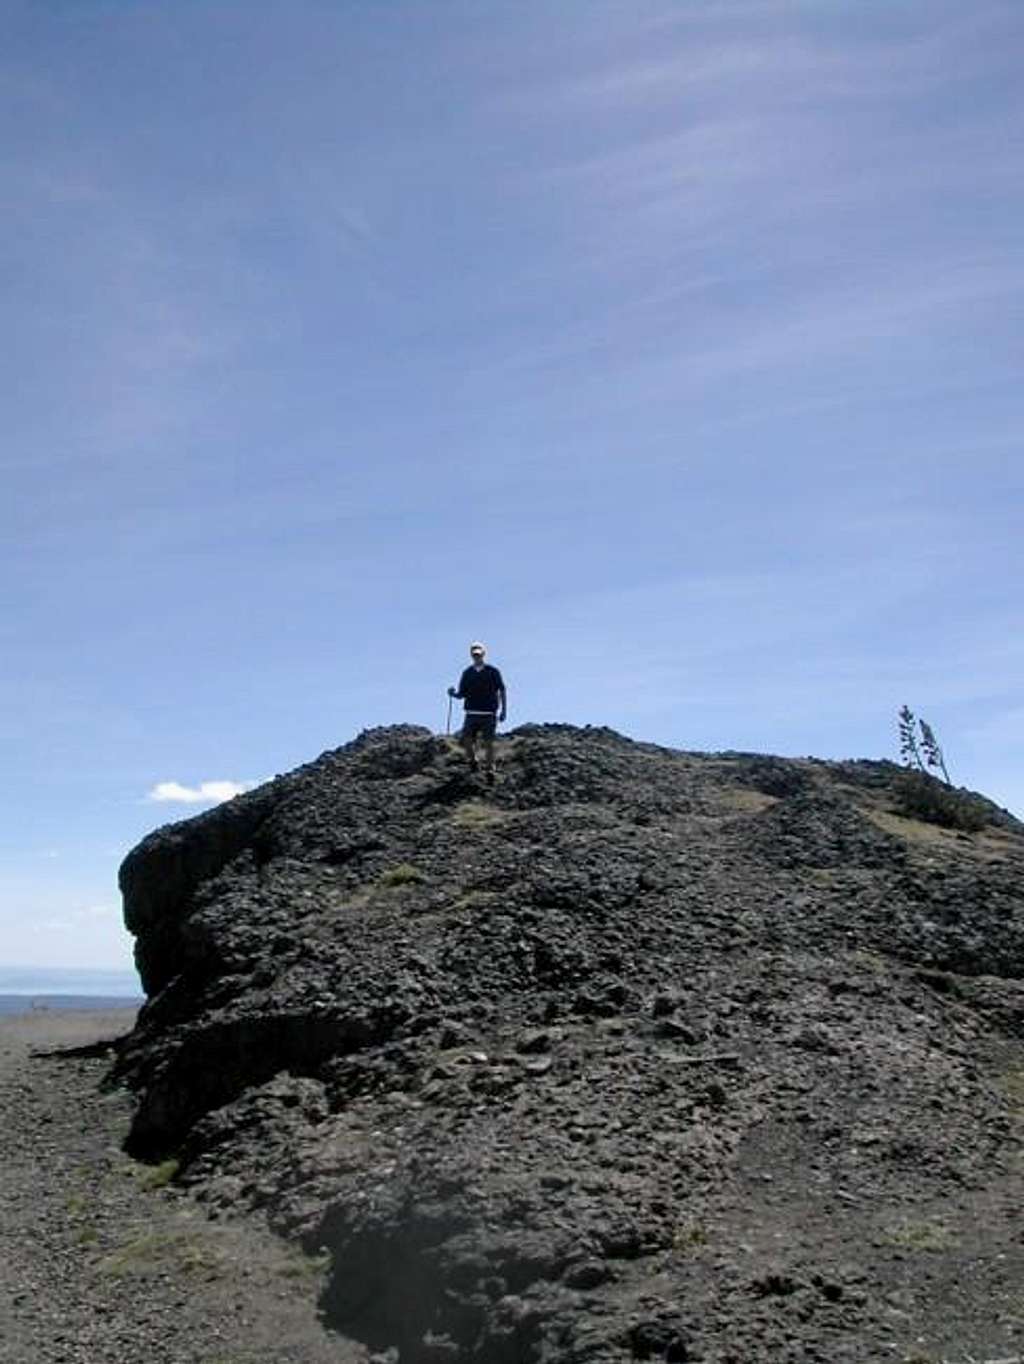 My son on top of rock cliff...